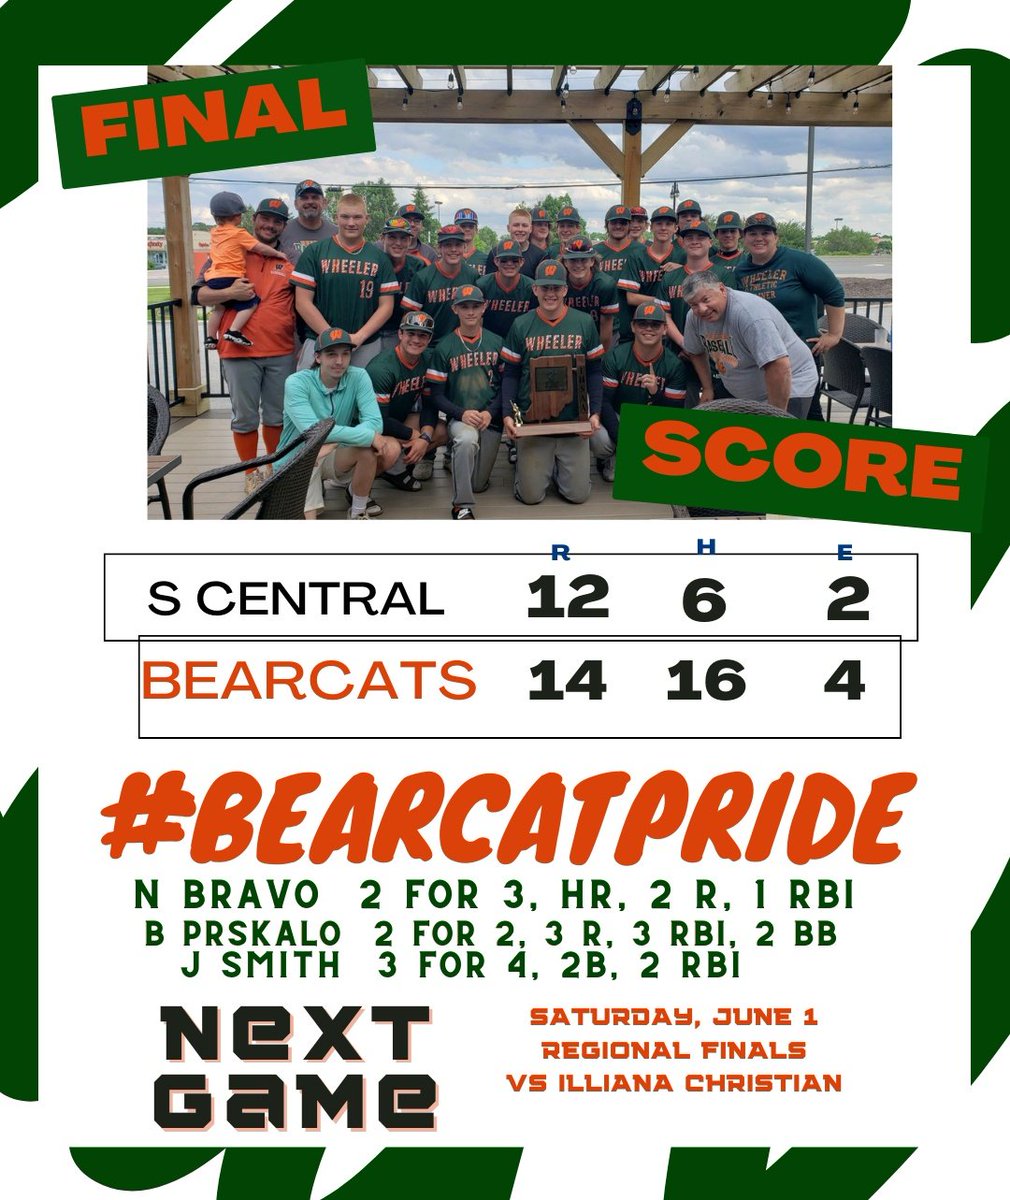 BEARCATS WIN! A hard fought back and forth game. We're going to regionals! #BEARCATPRIDE